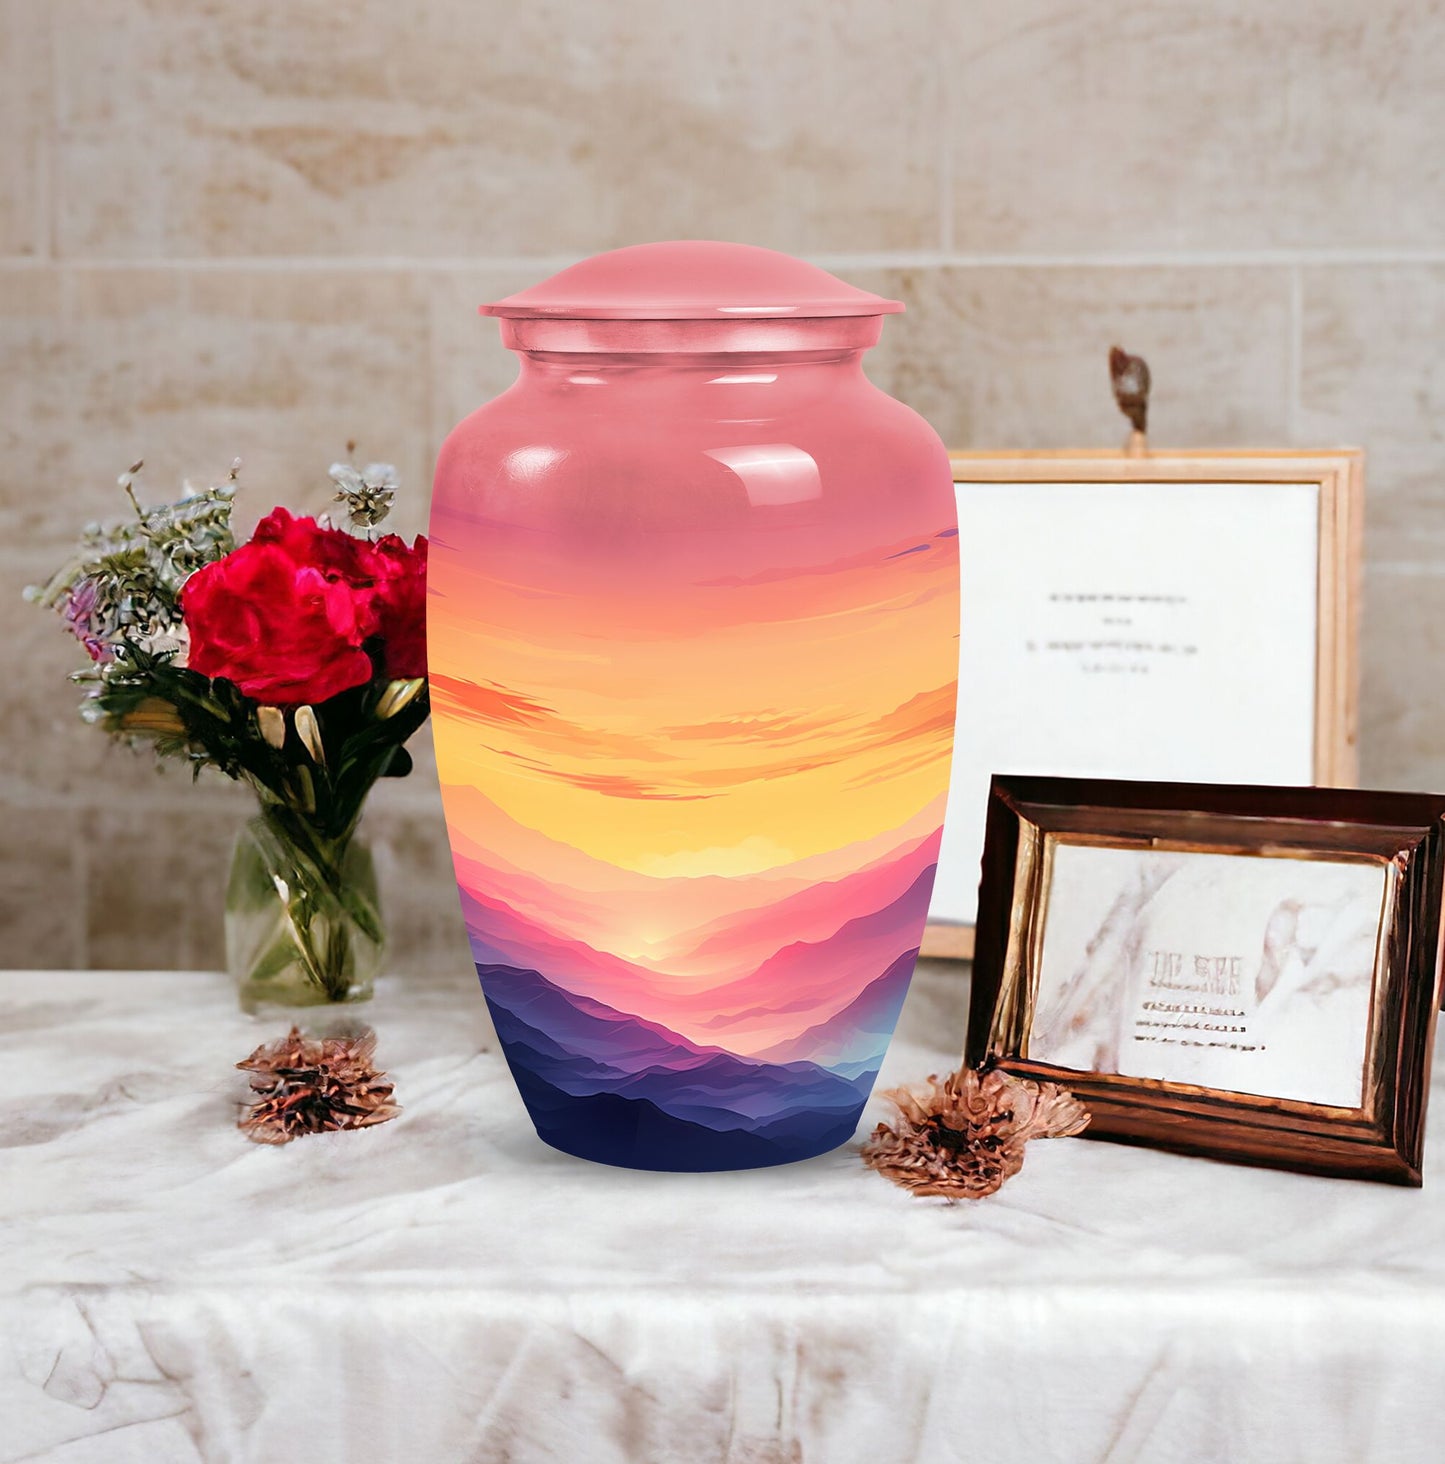 Large mountains themed decorative urn for adult ashes, suitable for men's burial